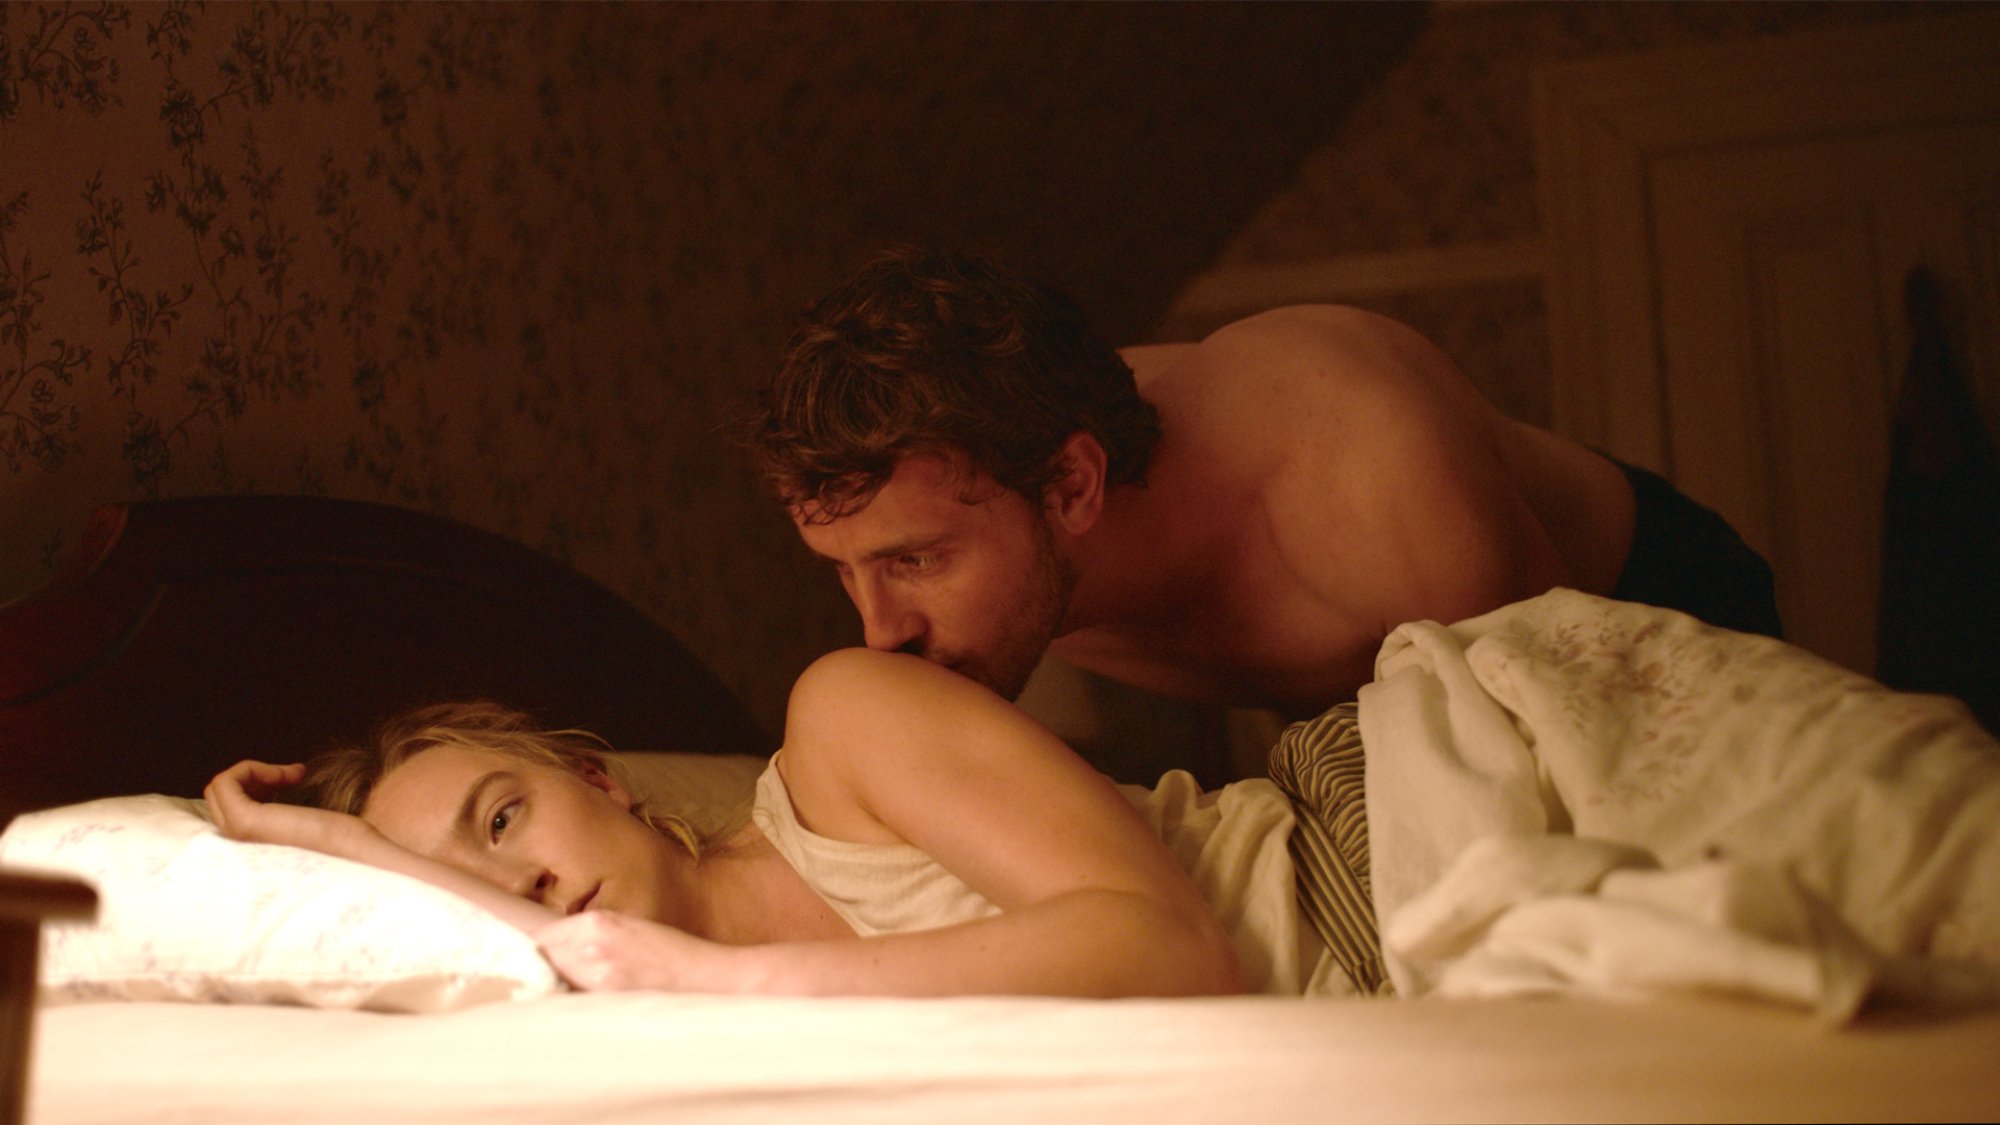 A woman lies in bed ignoring a man kissing her shoulder.